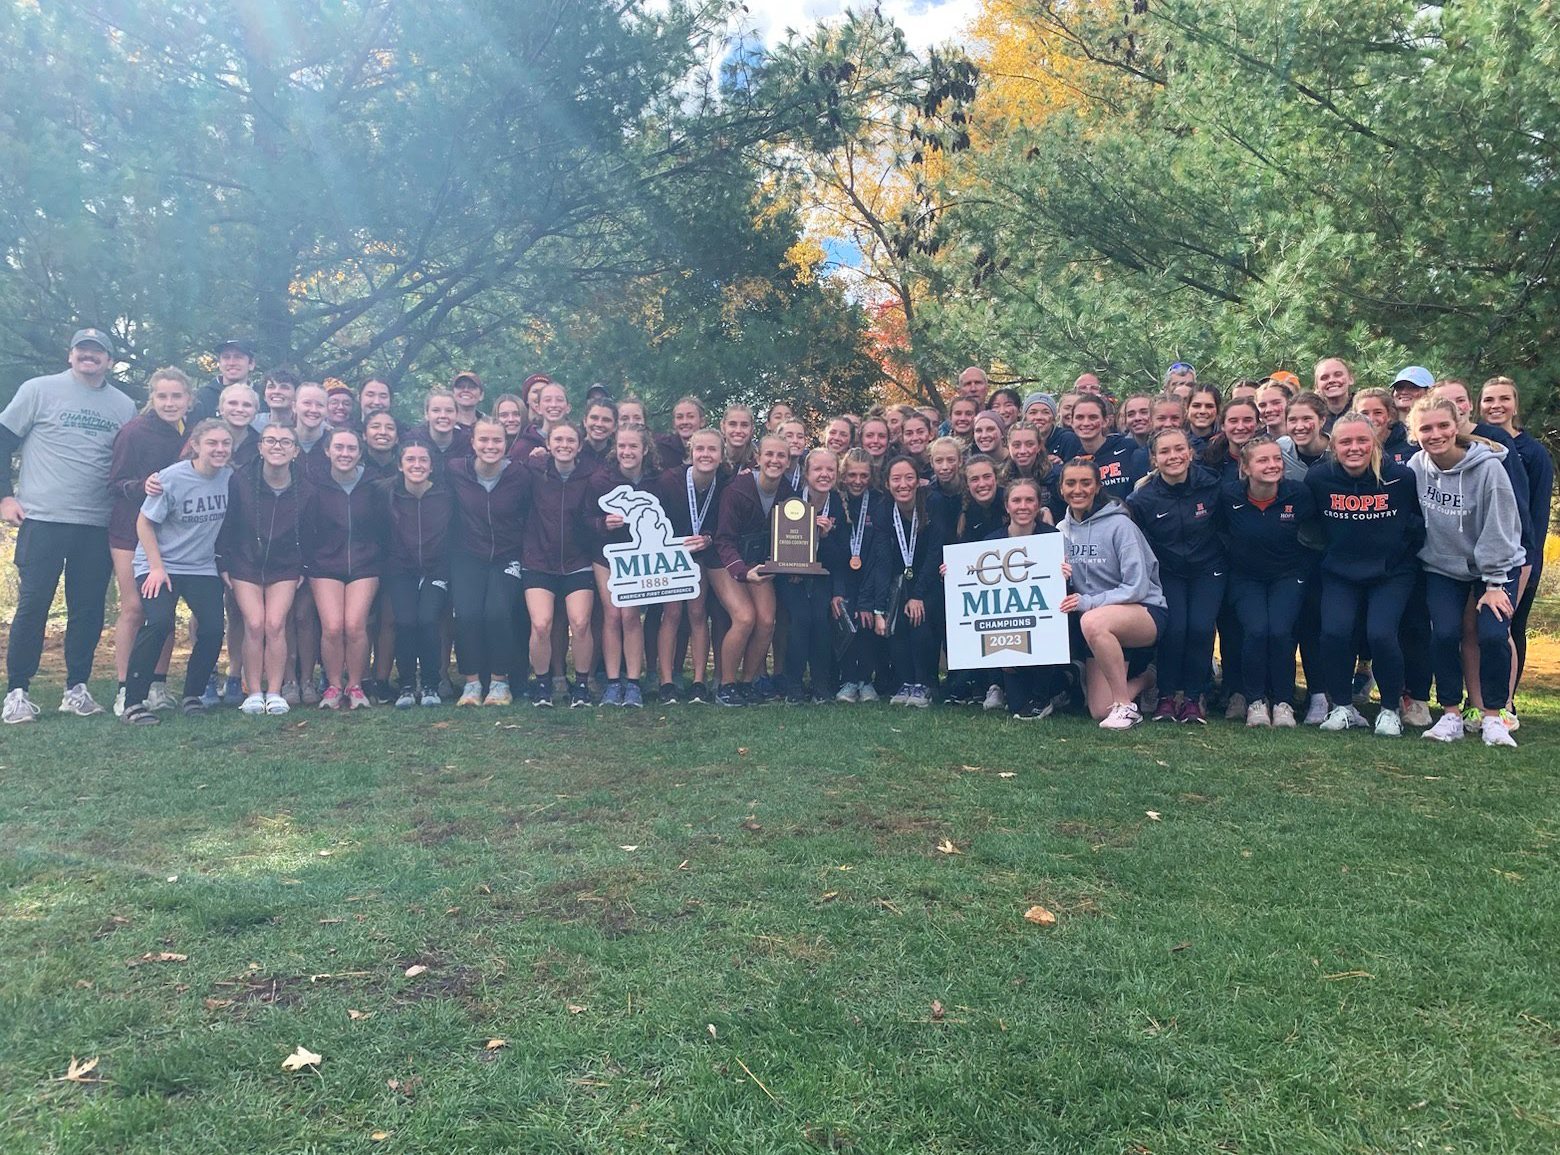 Calvin and Hope Share 2023 MIAA Women's Cross Country Championship Title; All-MIAA Honorees Announced